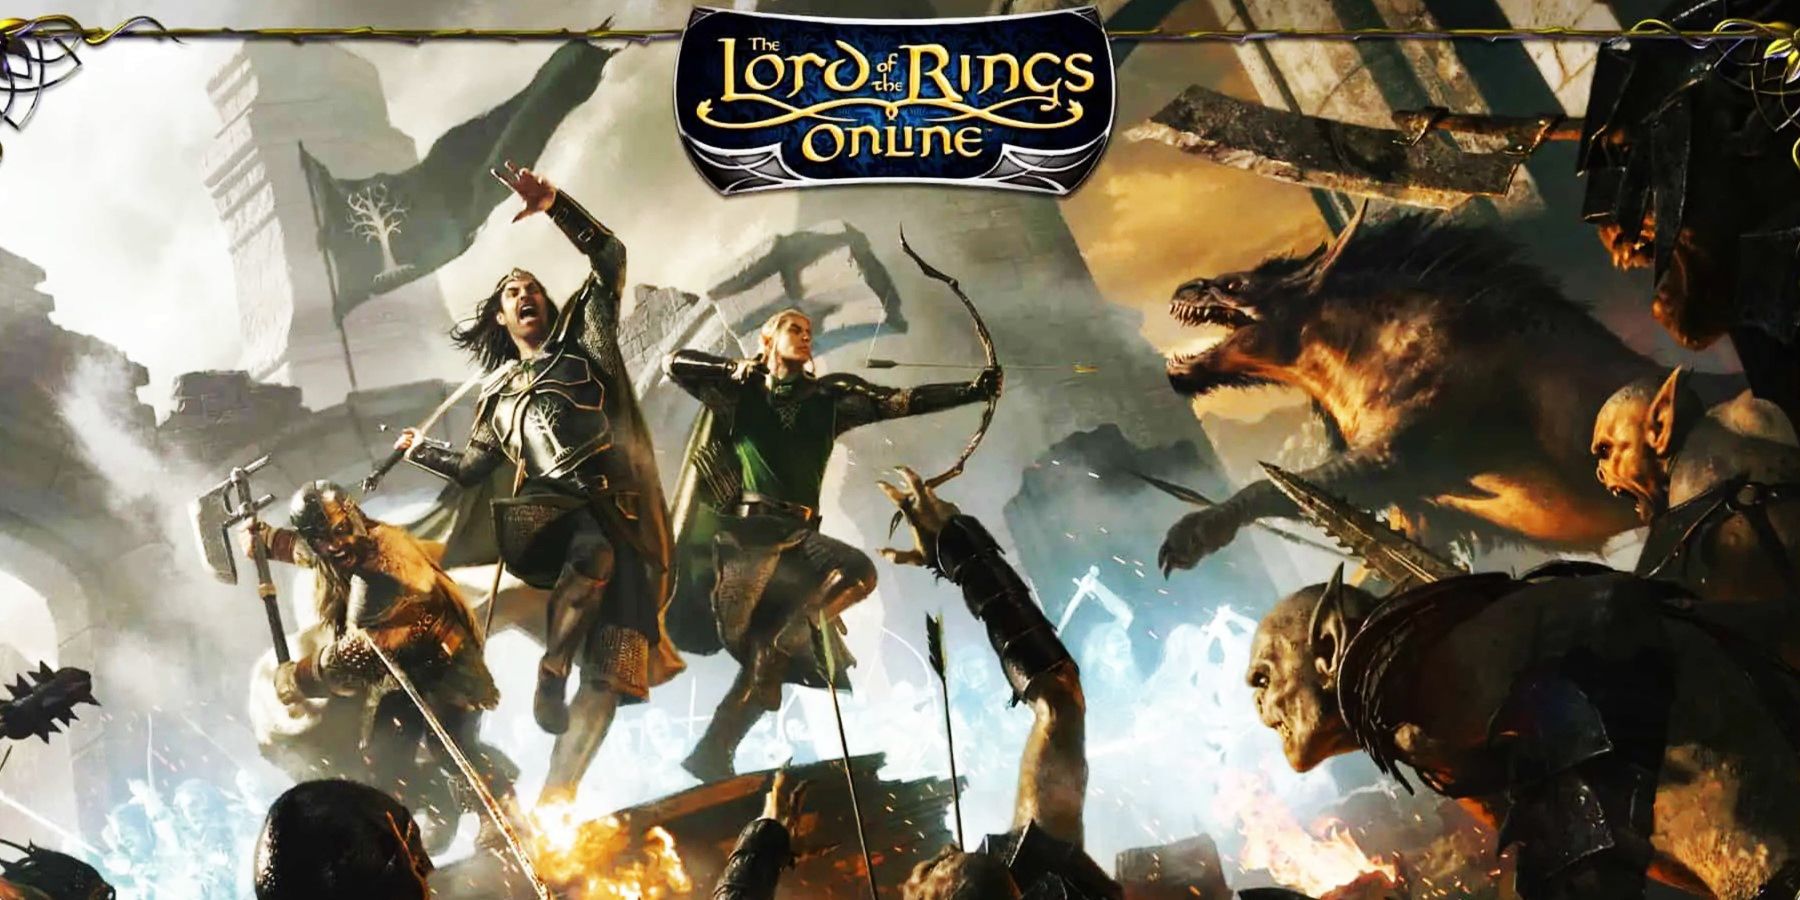 screenrant.com - Alex Chapman - How Lord Of The Rings Online Fits Into Tolkien's Books & Lore